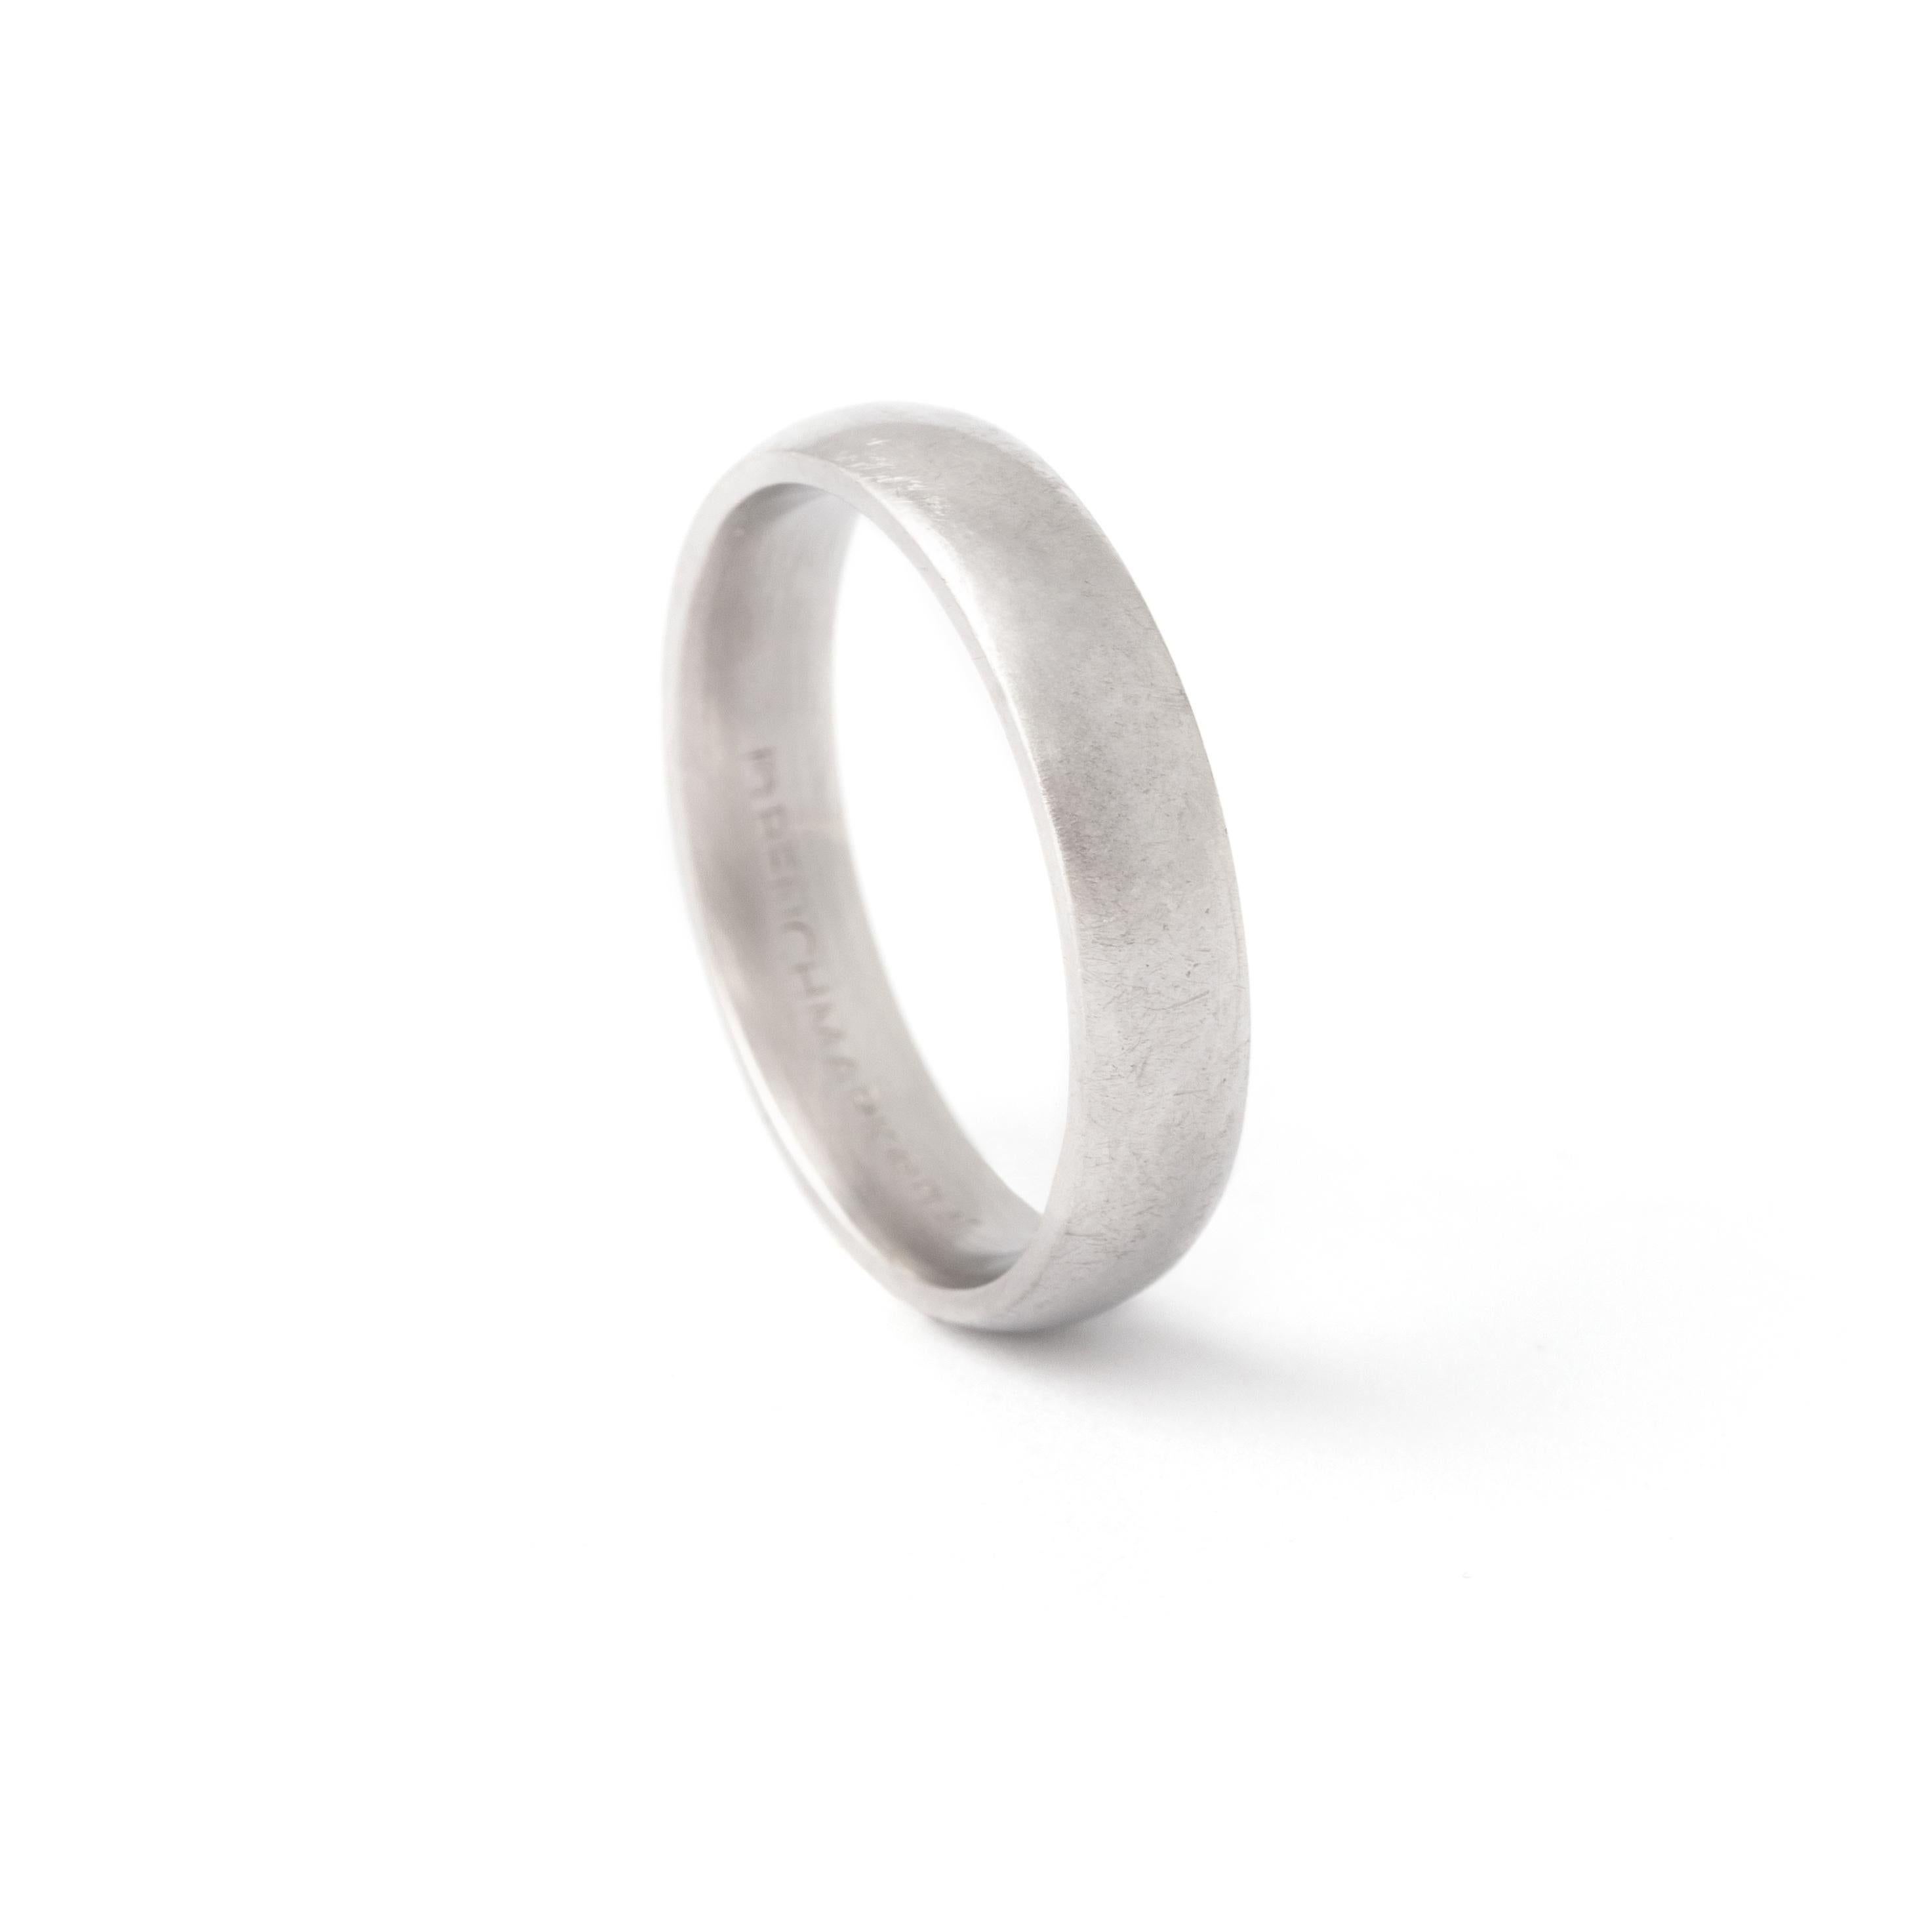 Platinum Band Ring.
Size: 63 (10.25 US)
Weight: 10.54 grams.